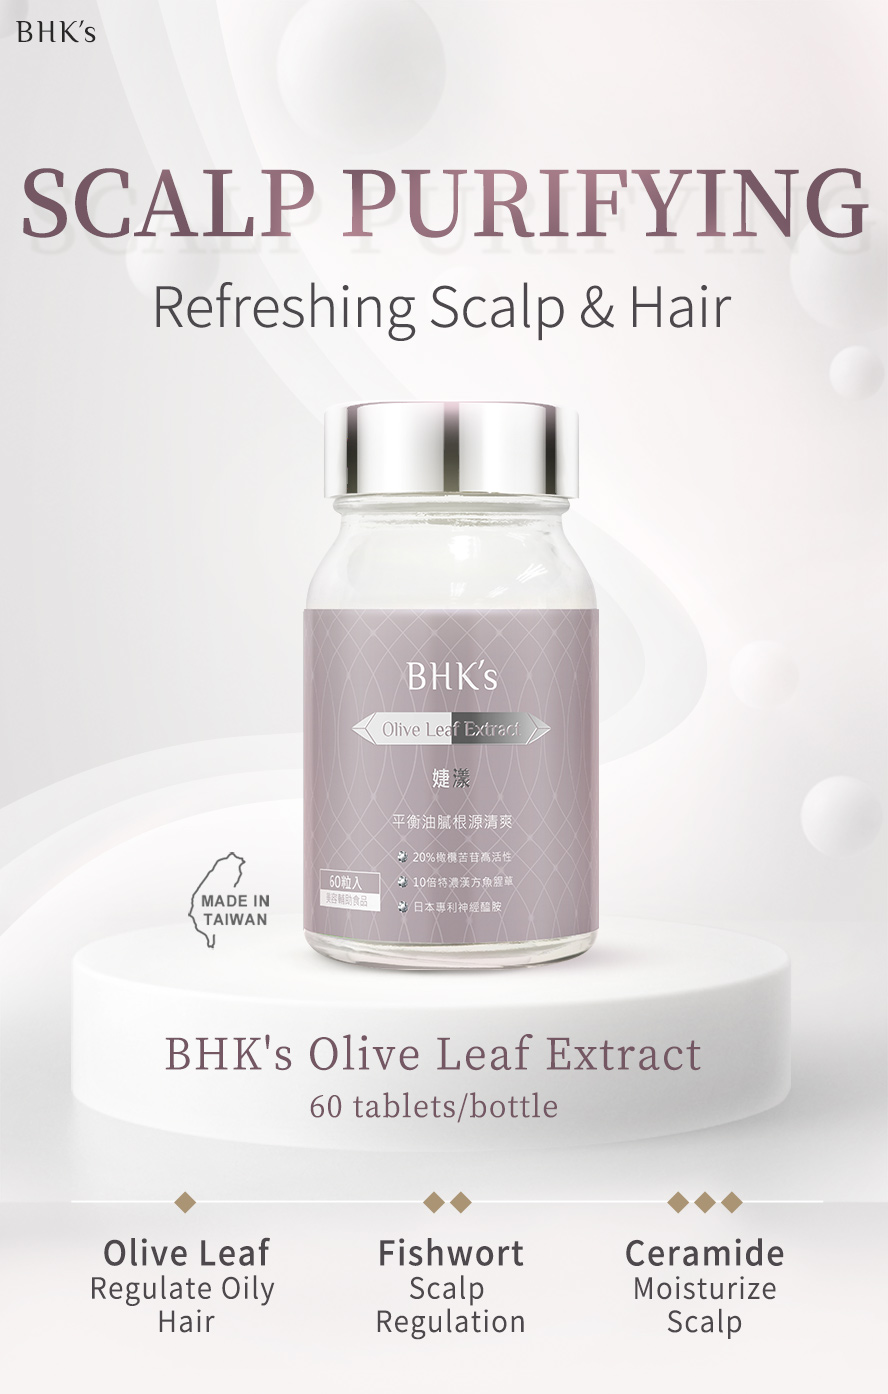 BHK's Olive Leaf Extract is formulated for scalp purifyuing to promote refreshing & degreasy scalp & hair with olive leaf, fishwort & ceramide